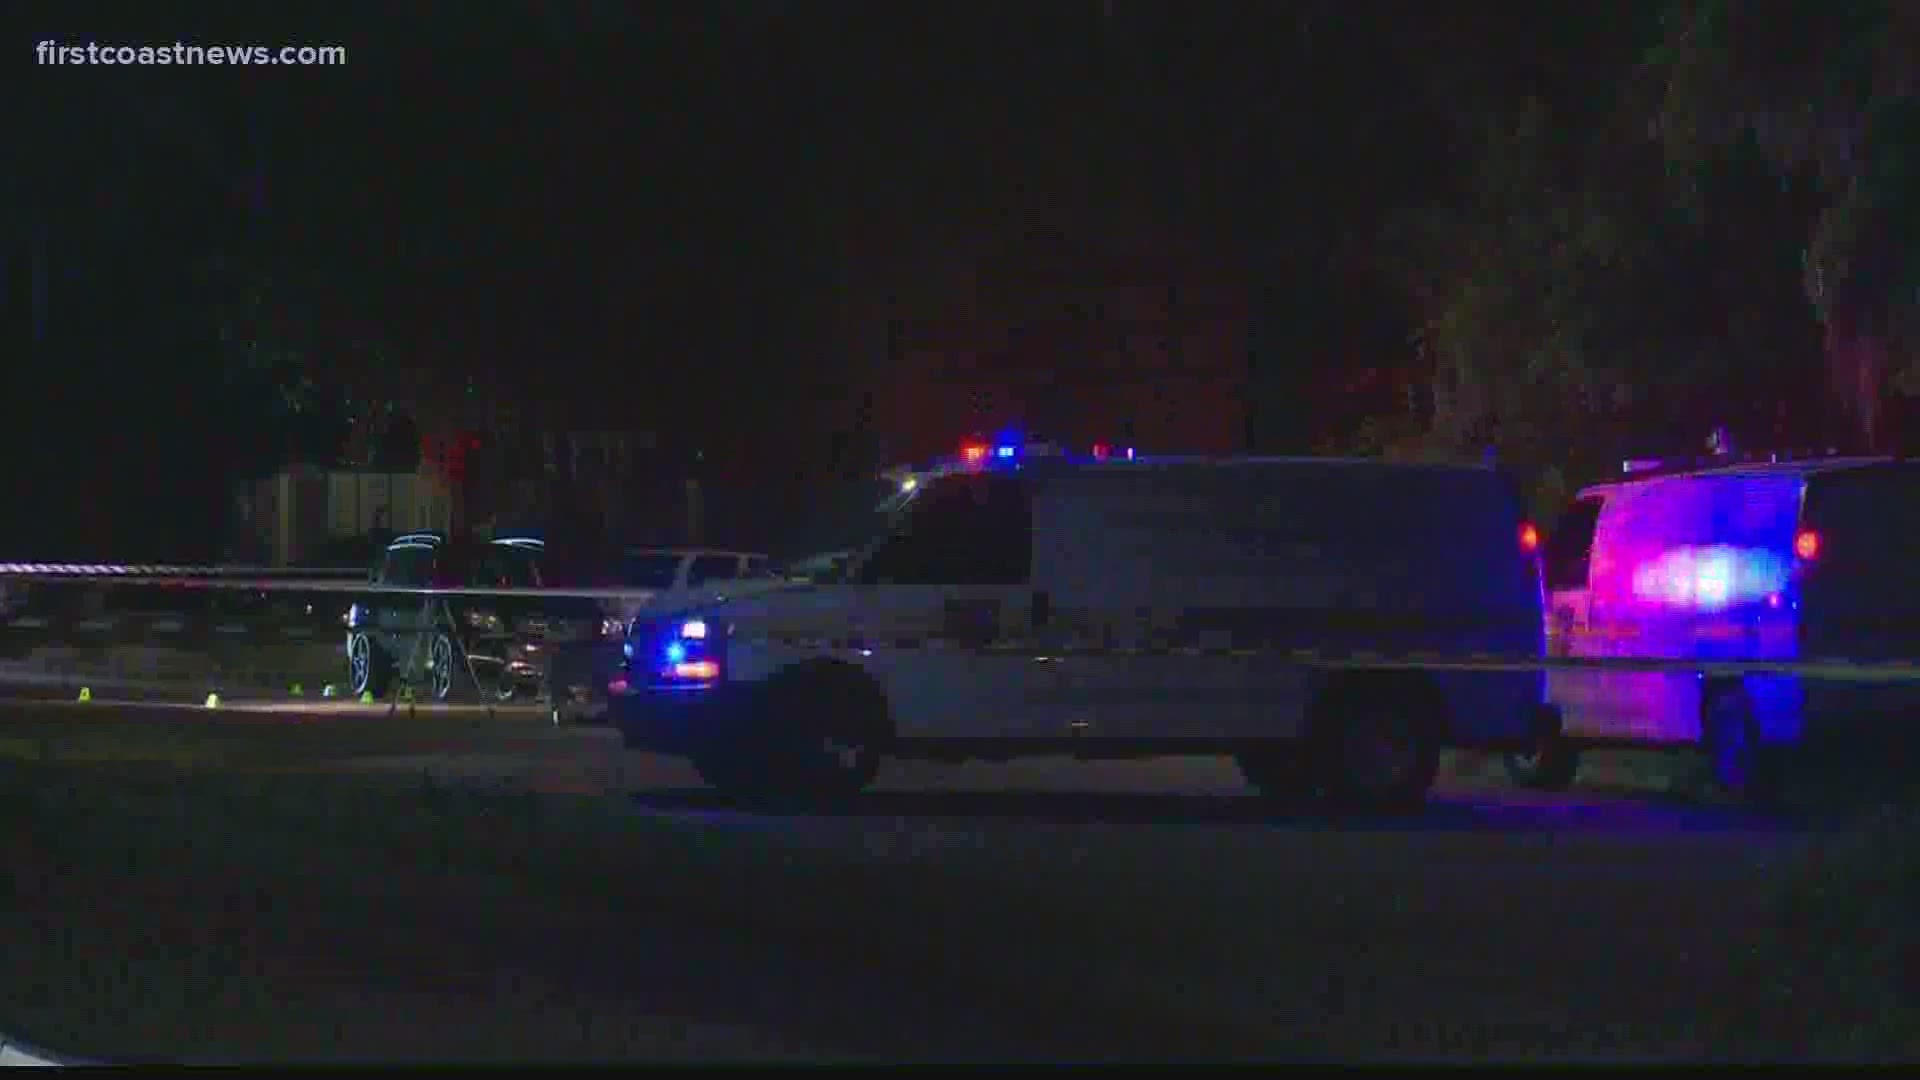 A man in his 20s was found dead night after a reported shooting in Jacksonville's Brentwood neighborhood.